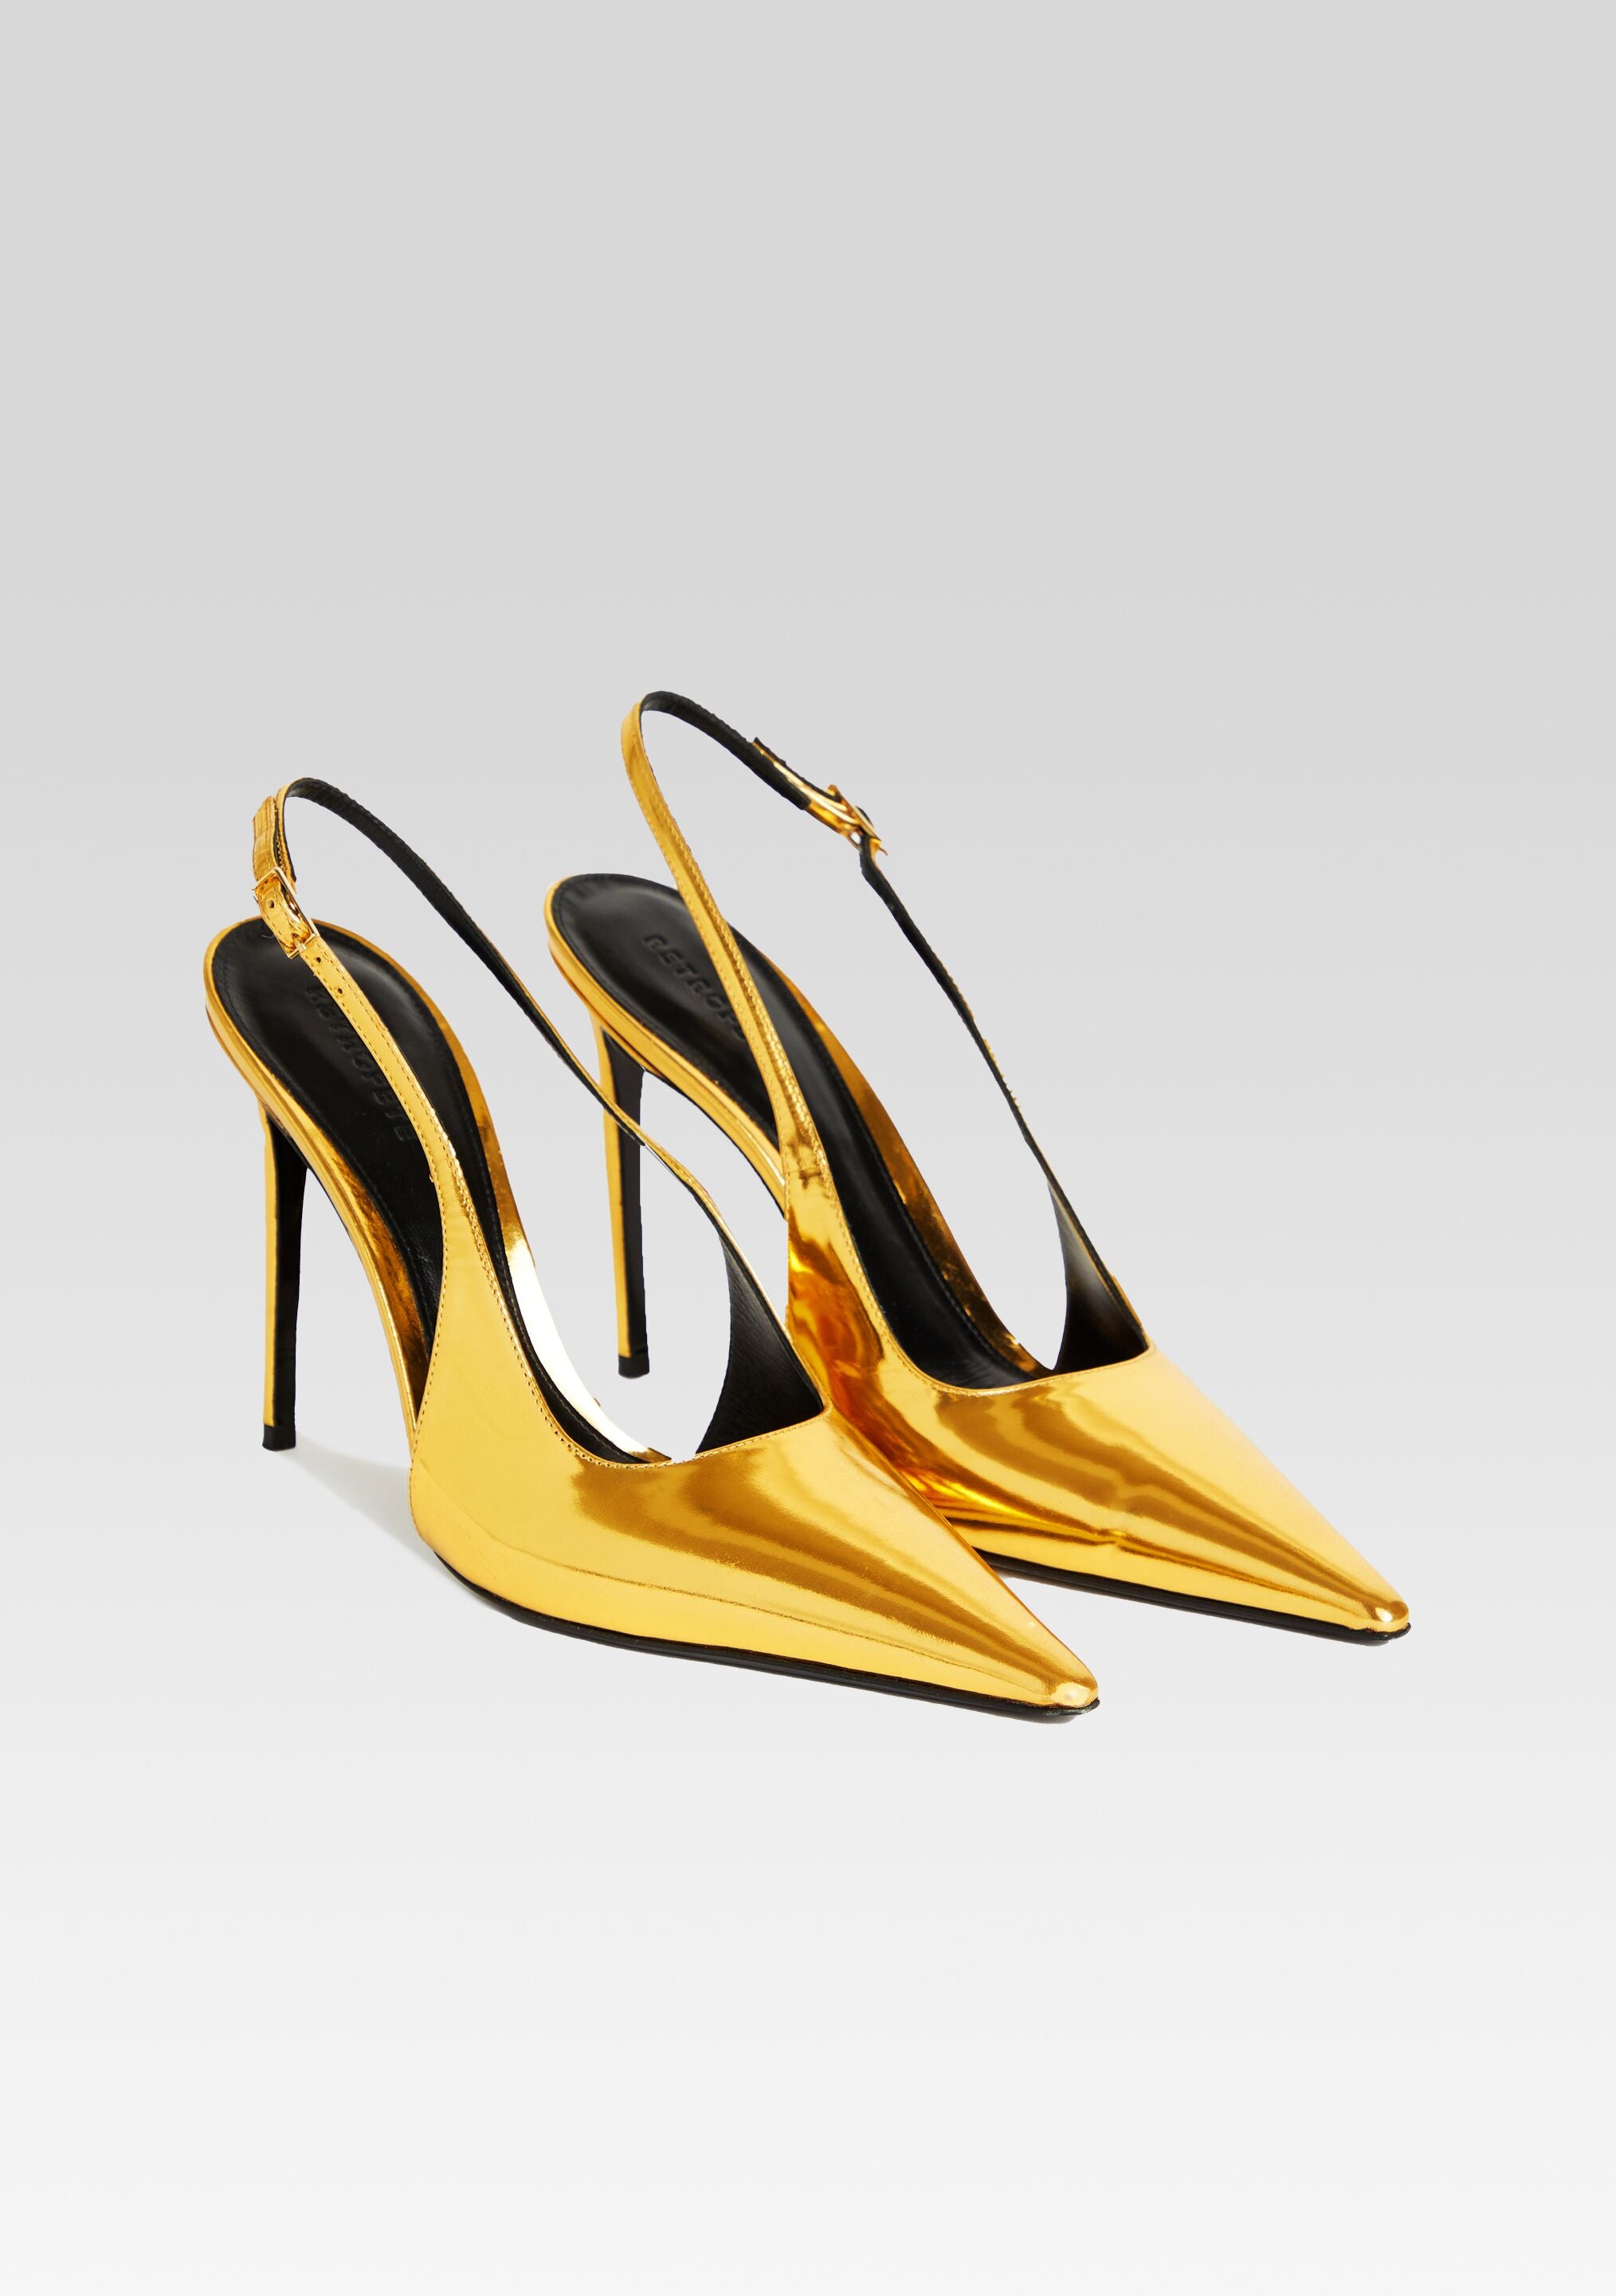 ZARA YELLOW FAUX PATENT LEATHER SLINGBACK COURT SHOES HEELS REF.7204/001 |  eBay